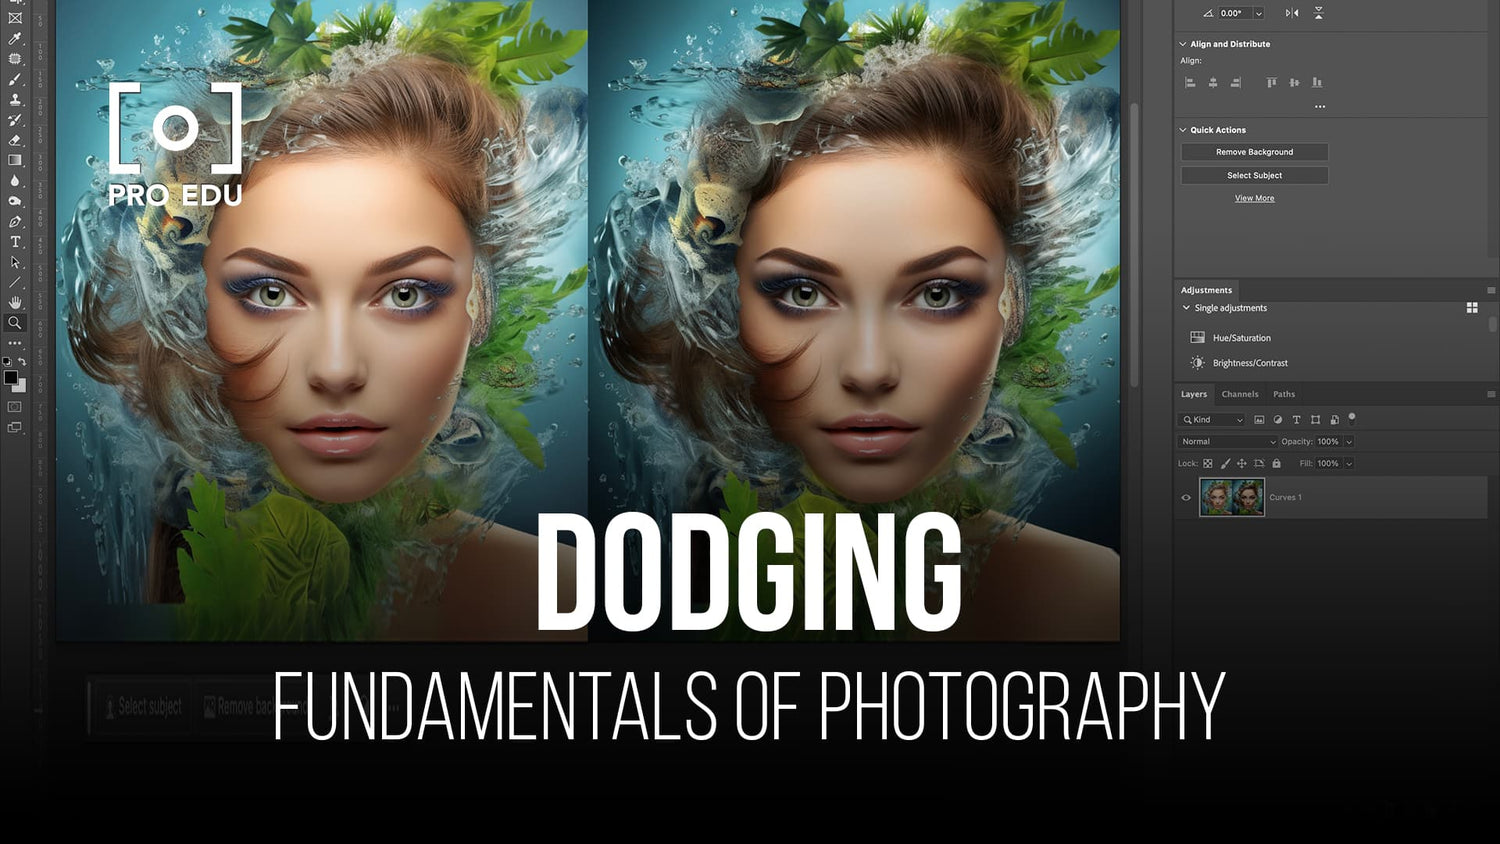 Enhancing images with the art of dodging in photo editing